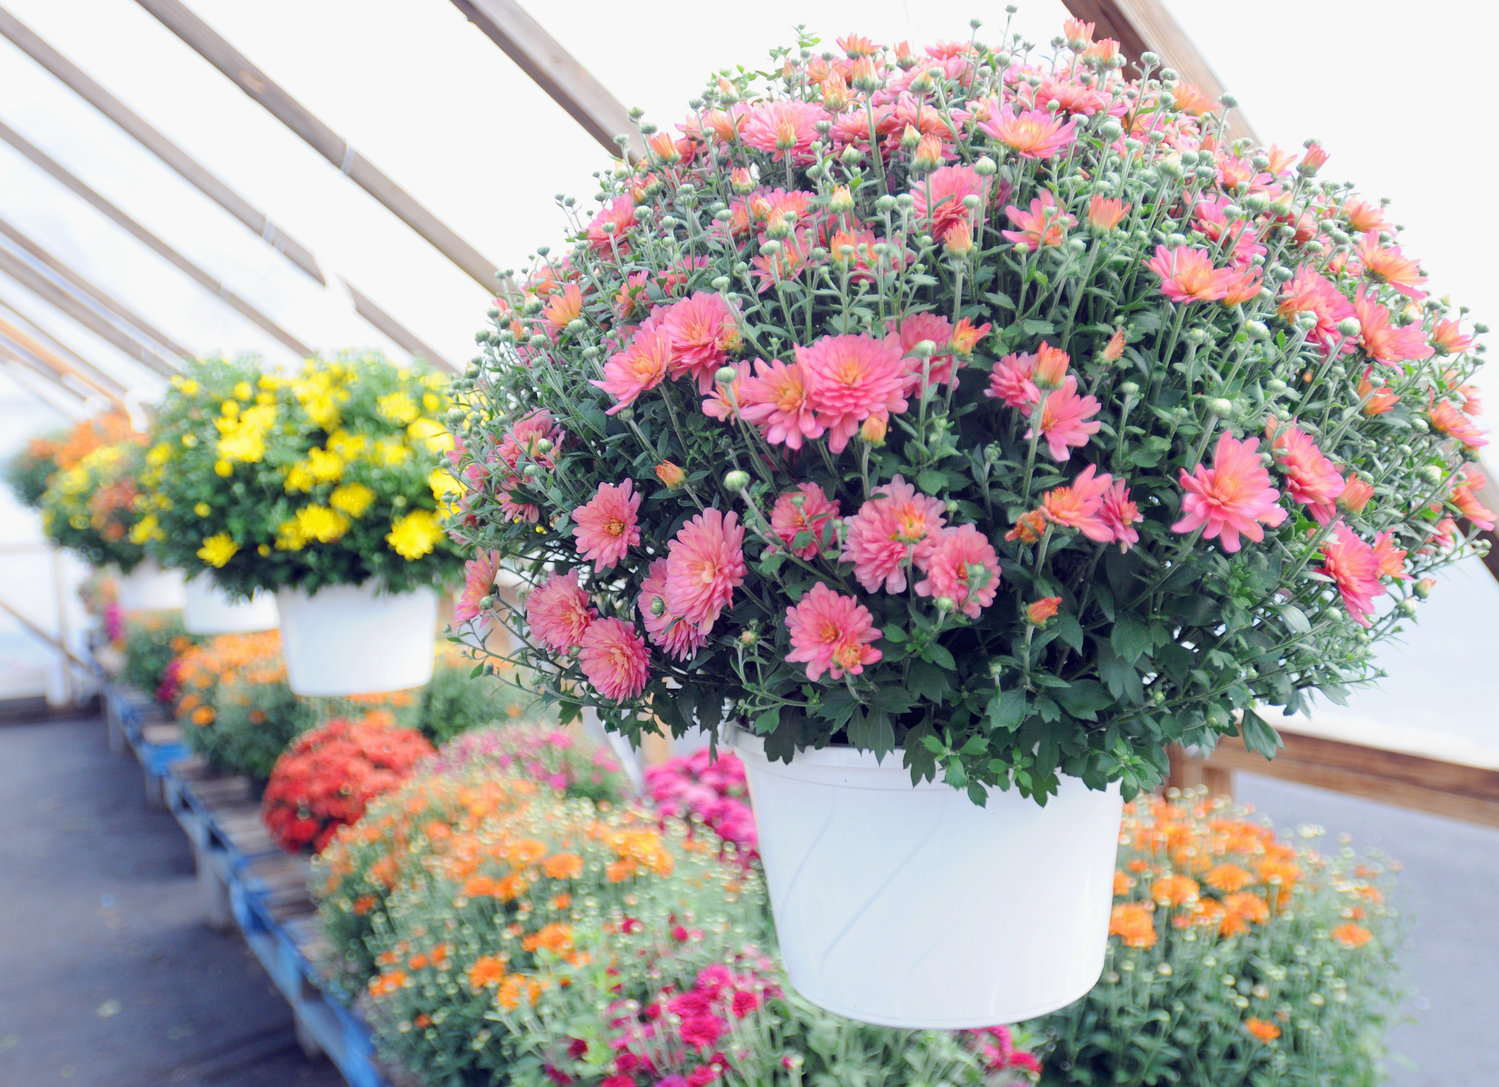 Some of the mums in the green house at Mitchells, 6964 S. James St. For fall color, Wise suggests adding hardier flowers, like mums or asters, that are designed to withstand colder temperatures and moisture.